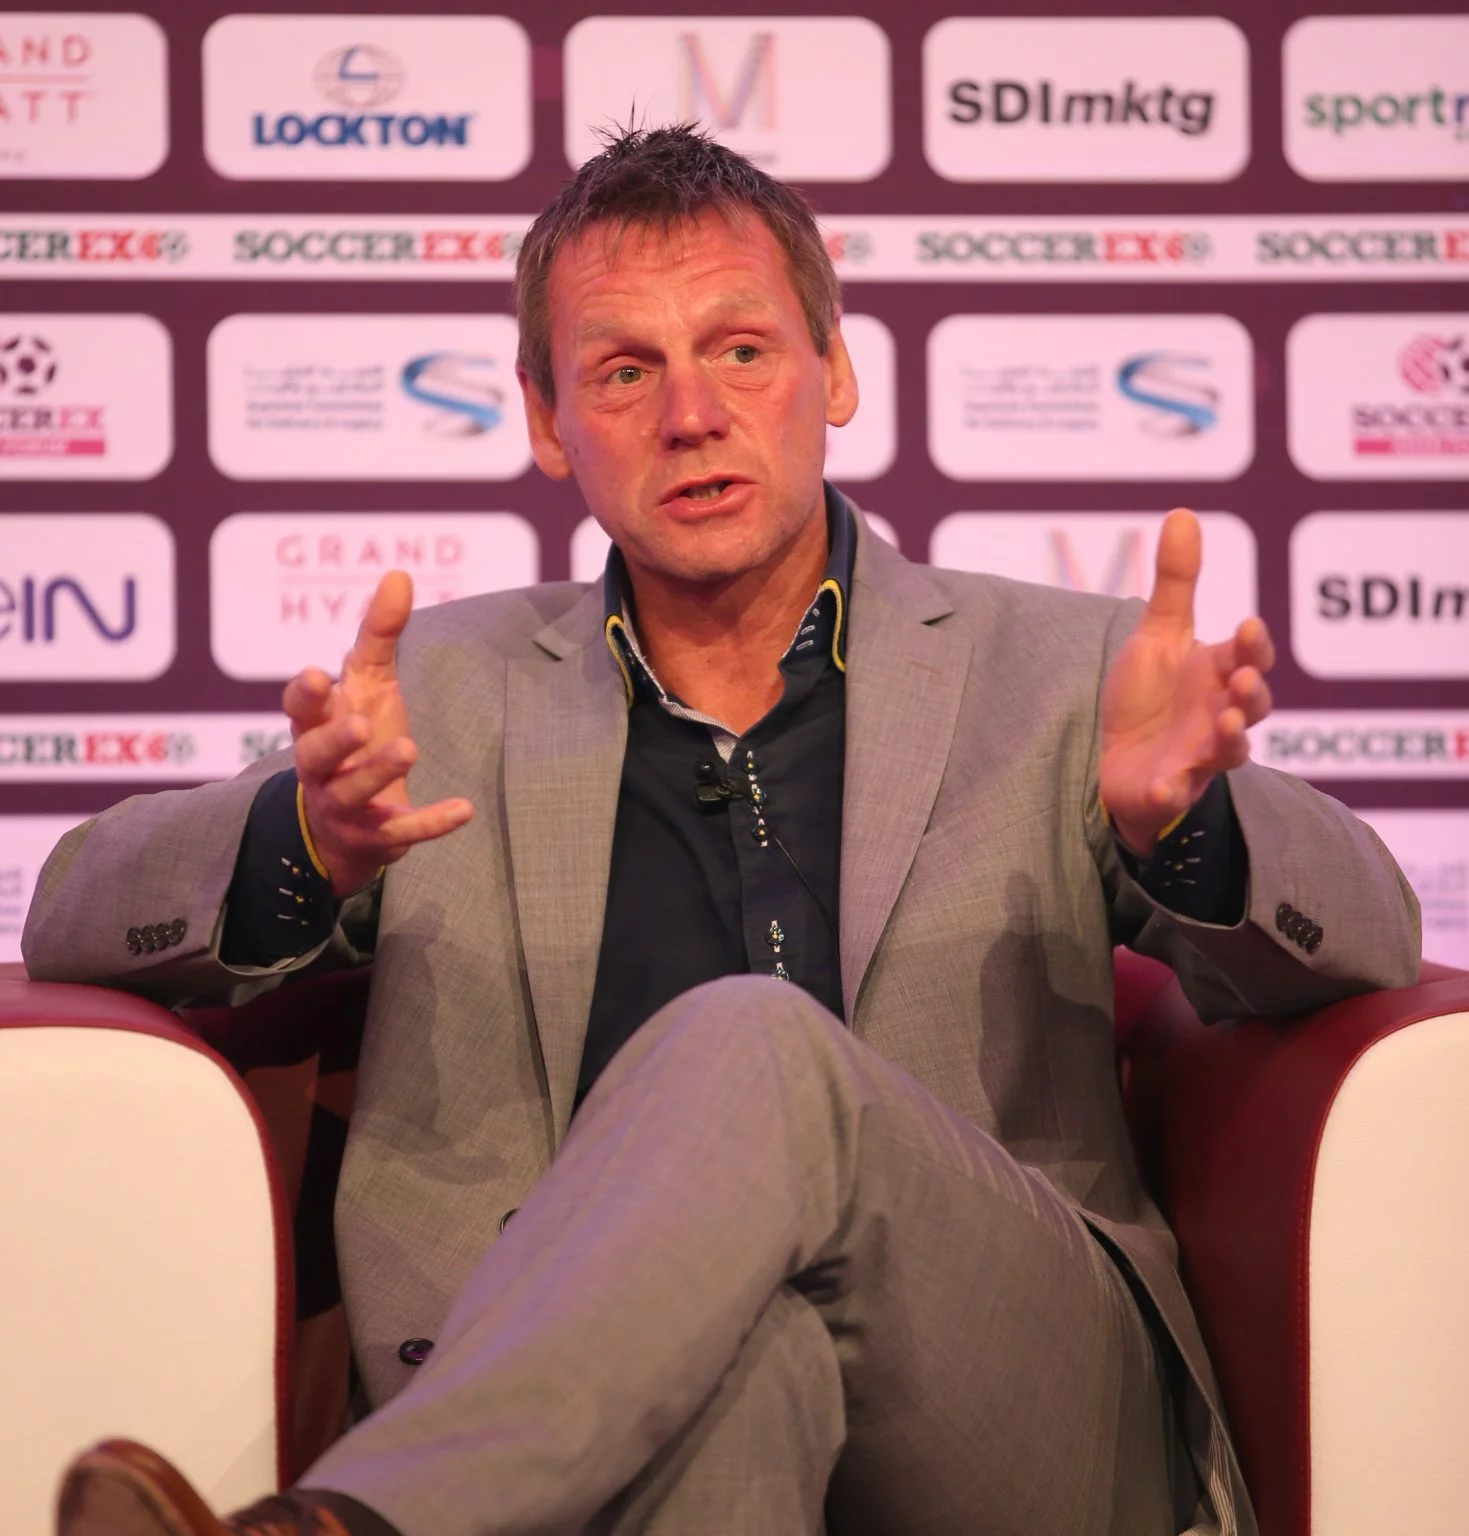 EPL: They’ve given up – Stuart Pearce slams Manchester United players